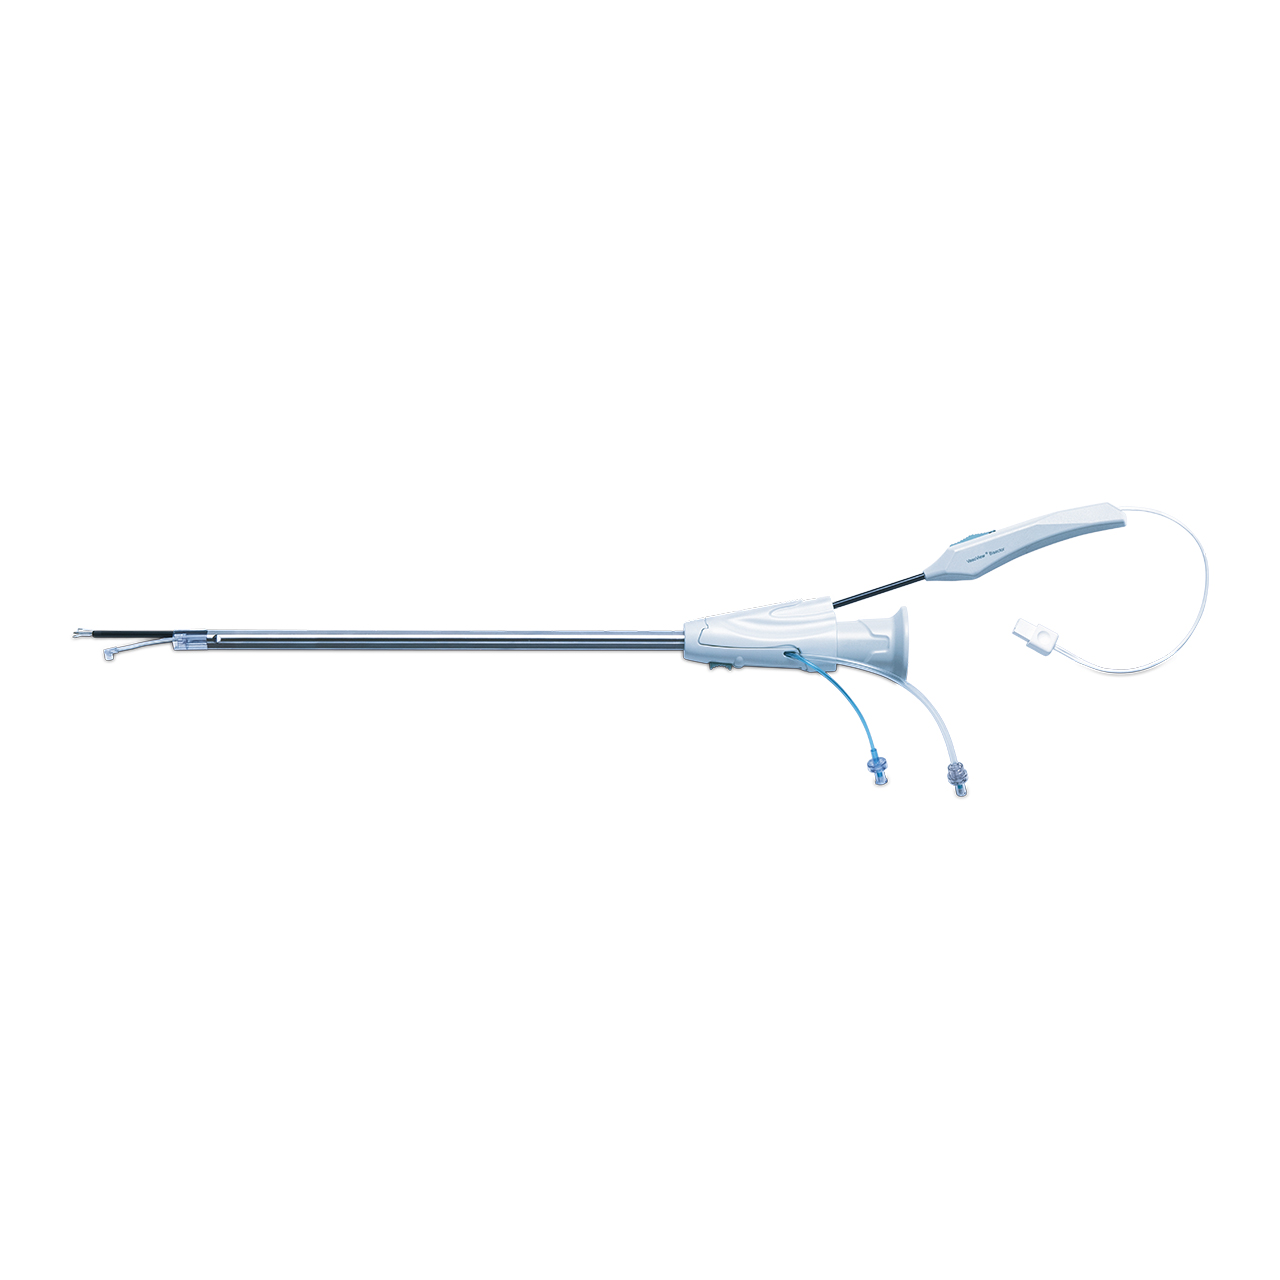 Vasoview 7xB Endoscopic Vessel Harvesting System provides early generation EVH users with key benefits of an advanced technology in familiar two handed format